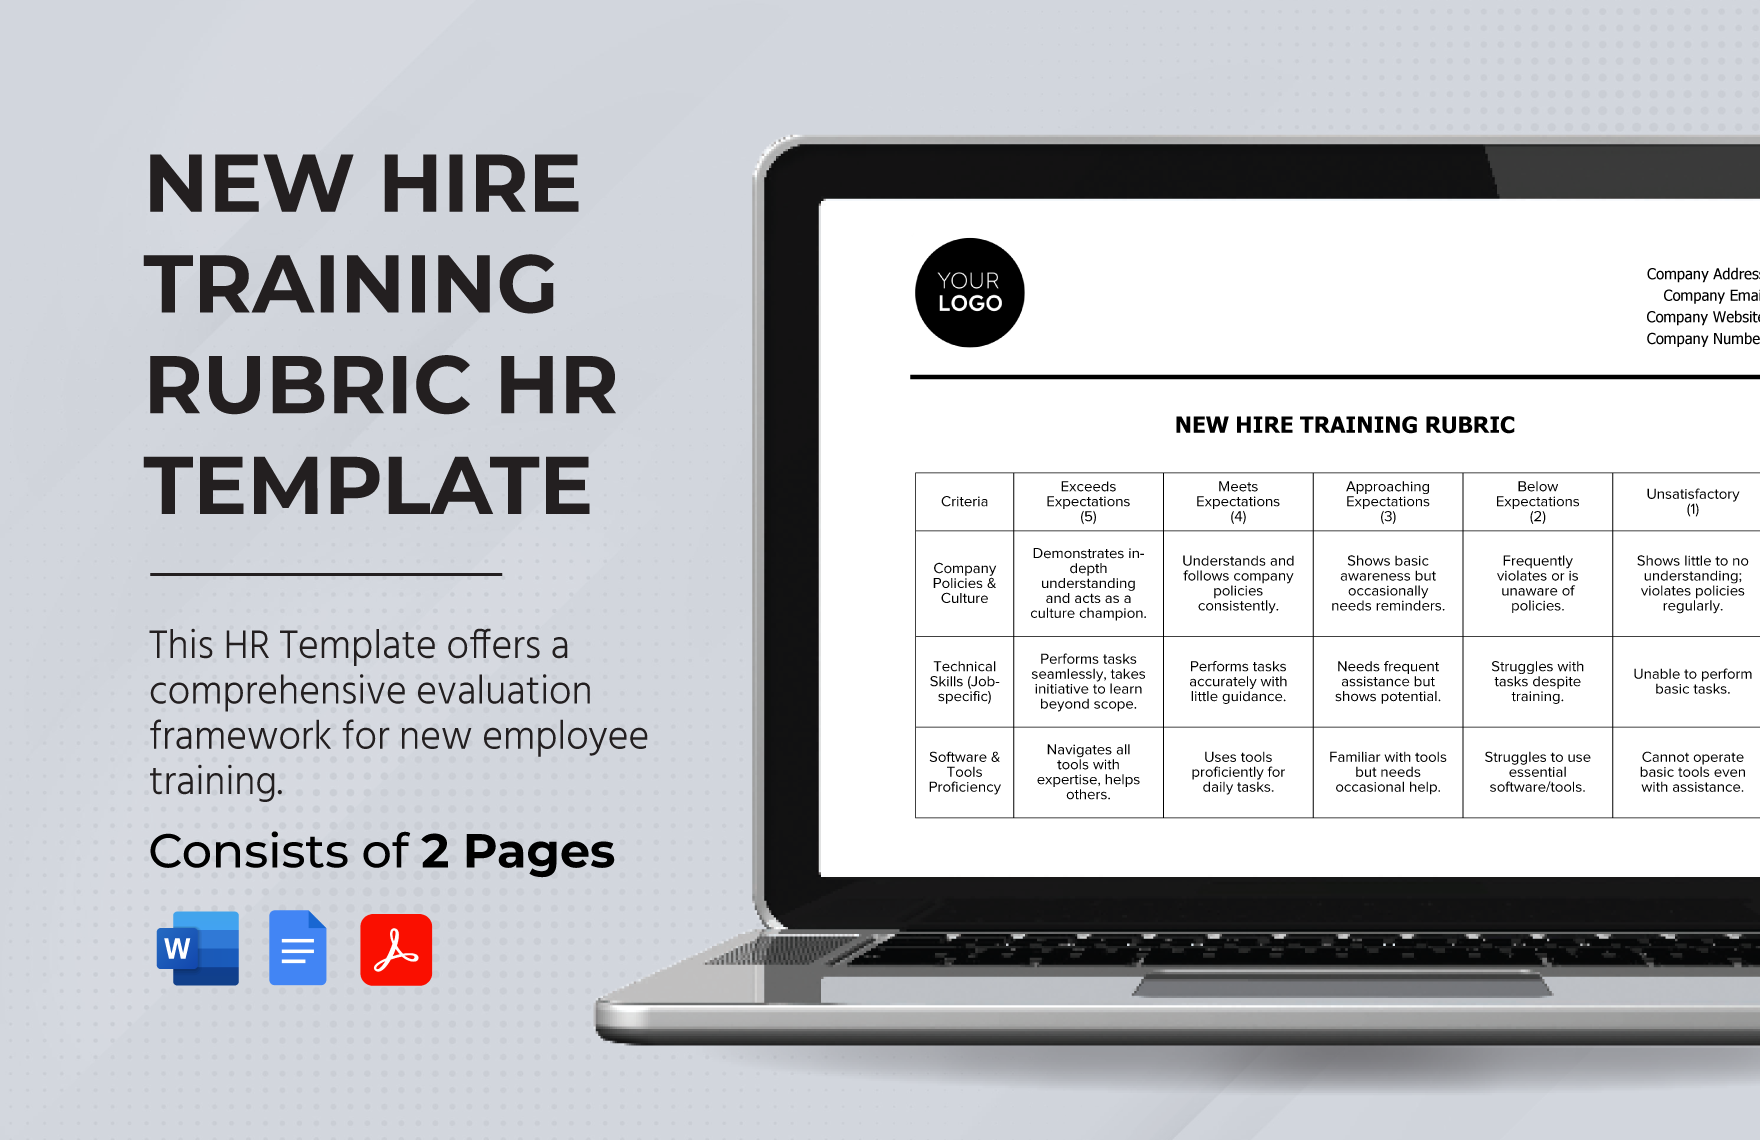 new-hire-training-rubric-hr-template